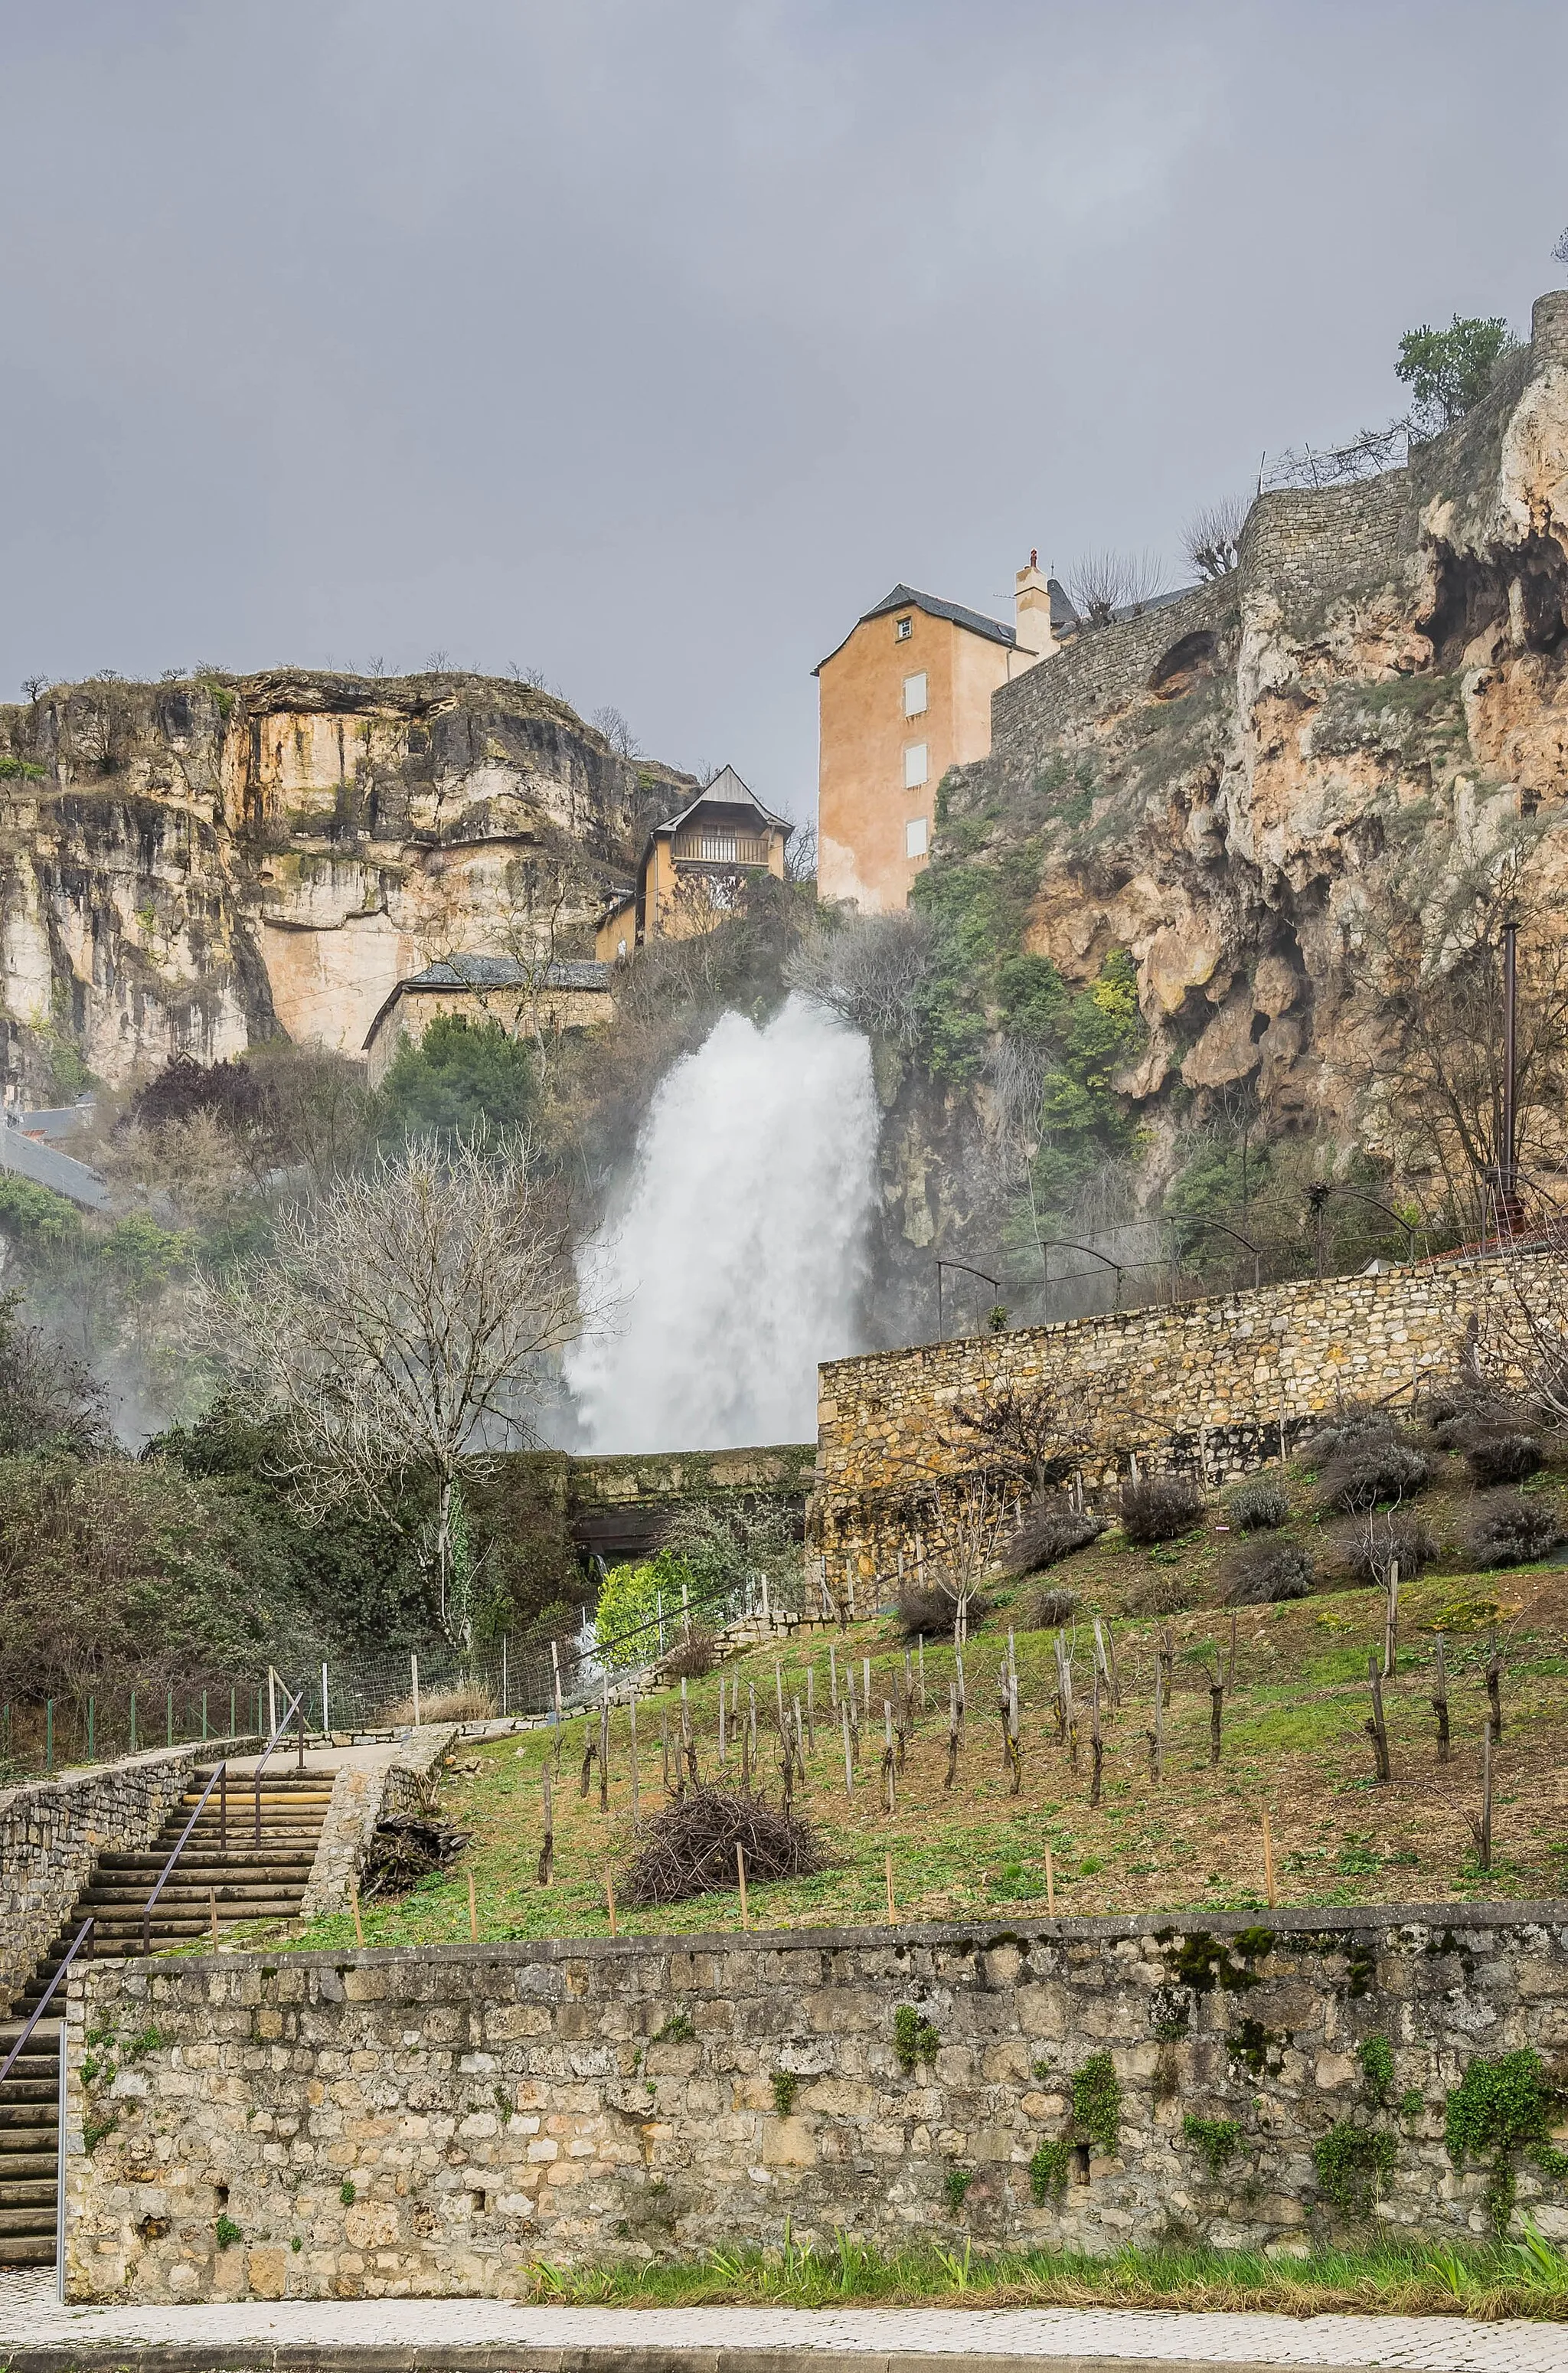 Photo showing: Waterfall in Salles-la-Source, Aveyron, France